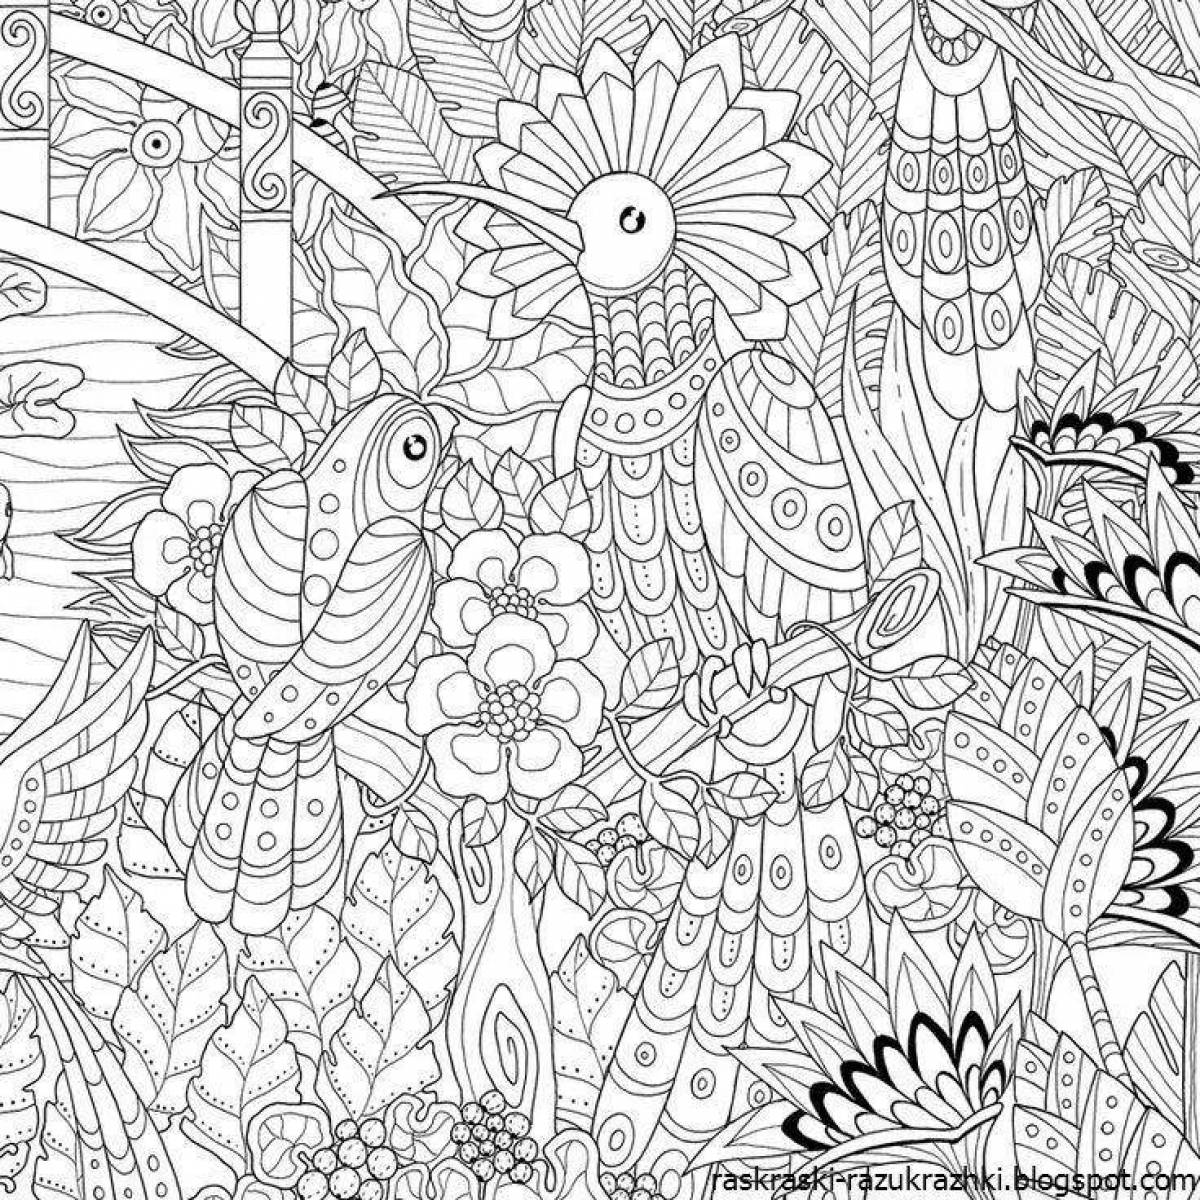 Fancy coloring for adult children